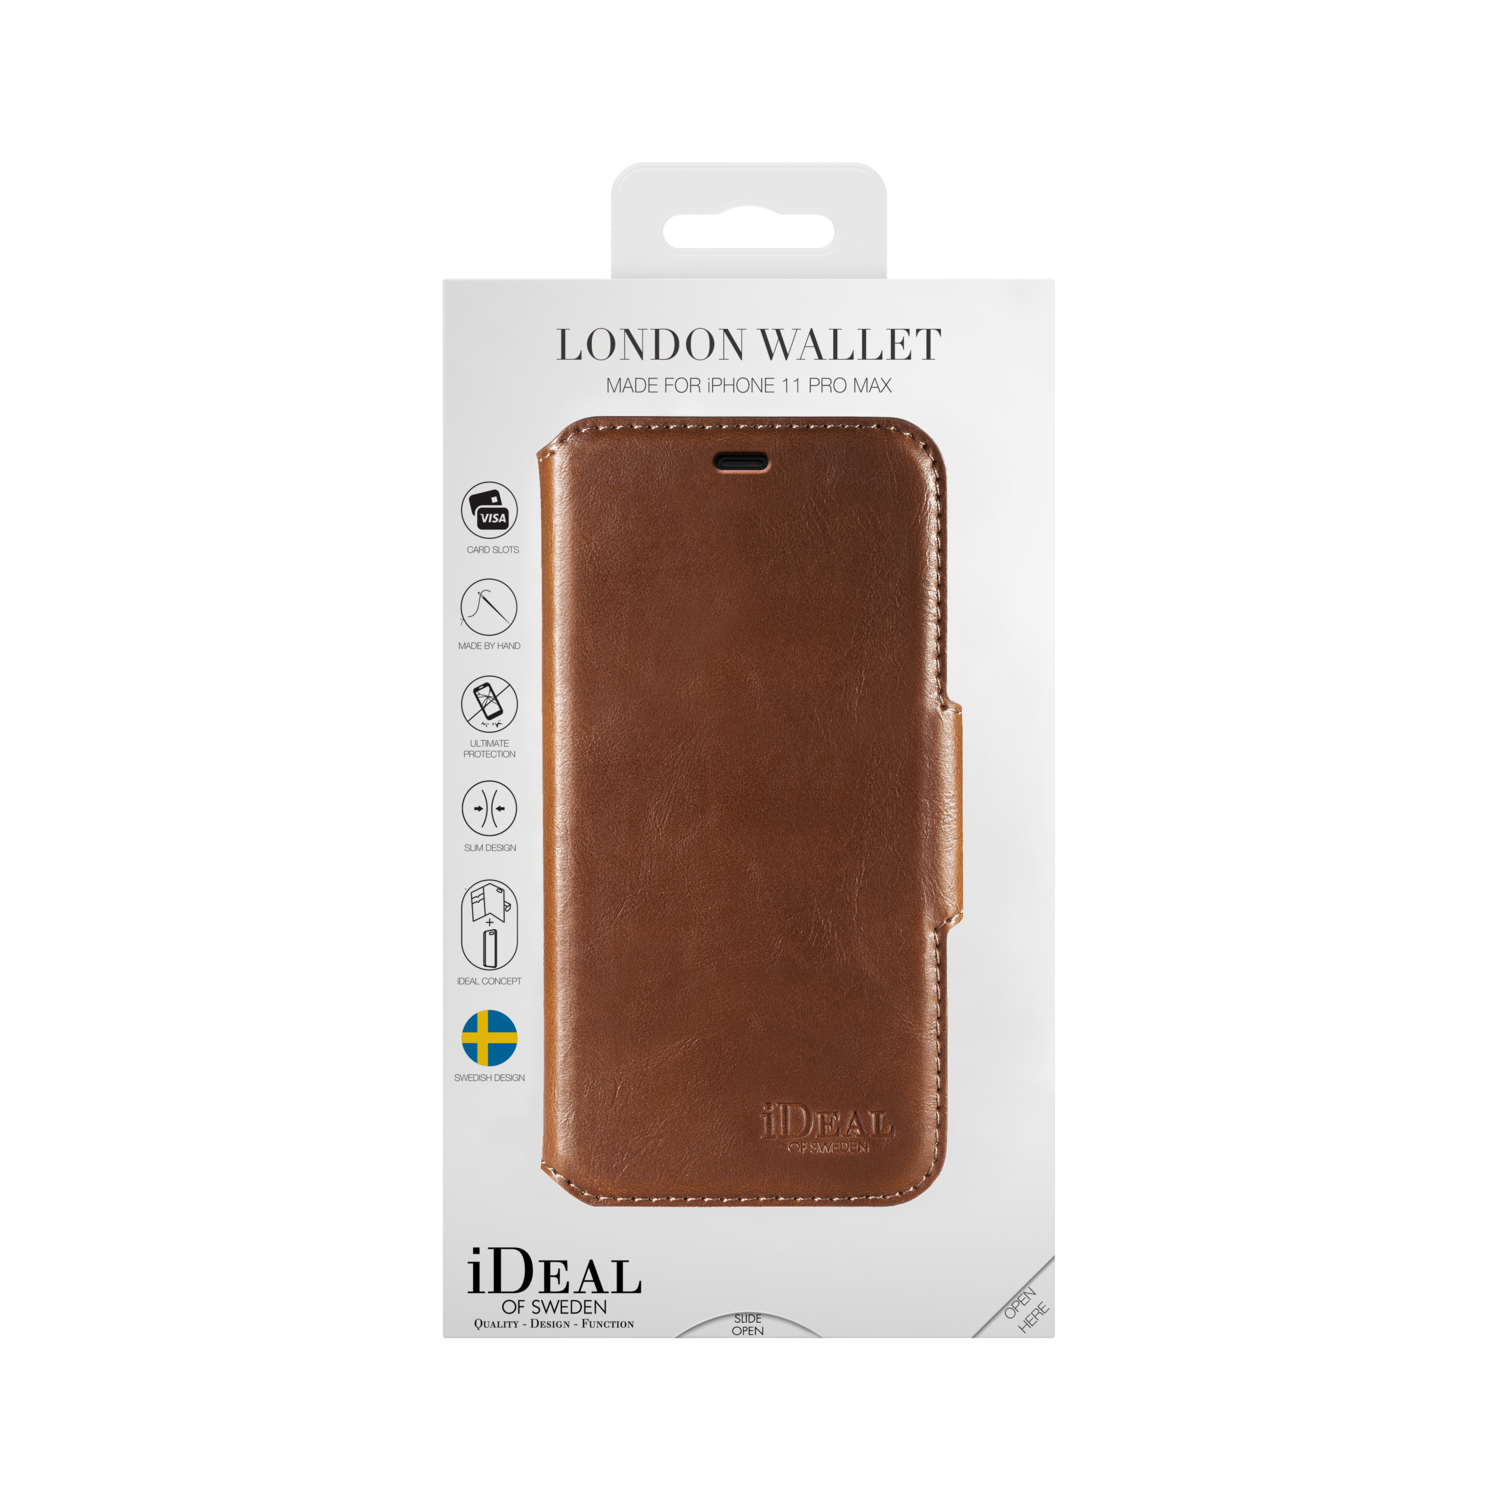 iDeal Of Sweden iPhone 11 Pro Max 6.5" London Wallet Case, Brown